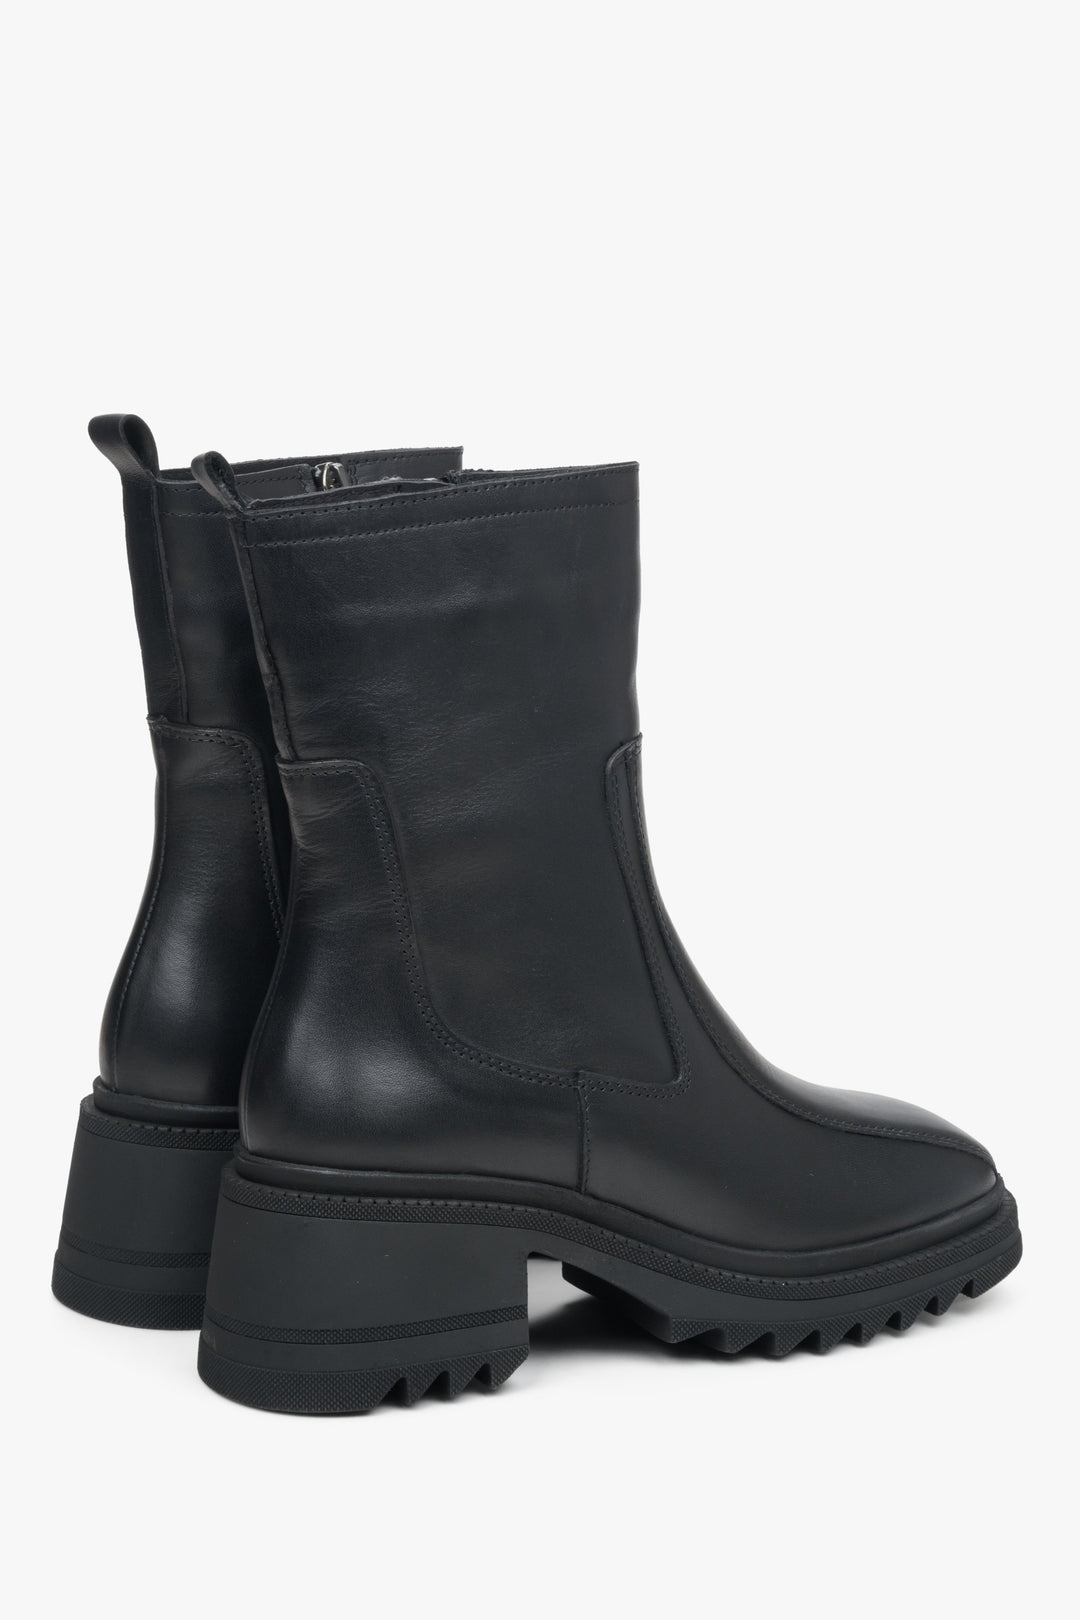 Women's boots in genuine leather by Estro - close-up on the side line and back of the boot.